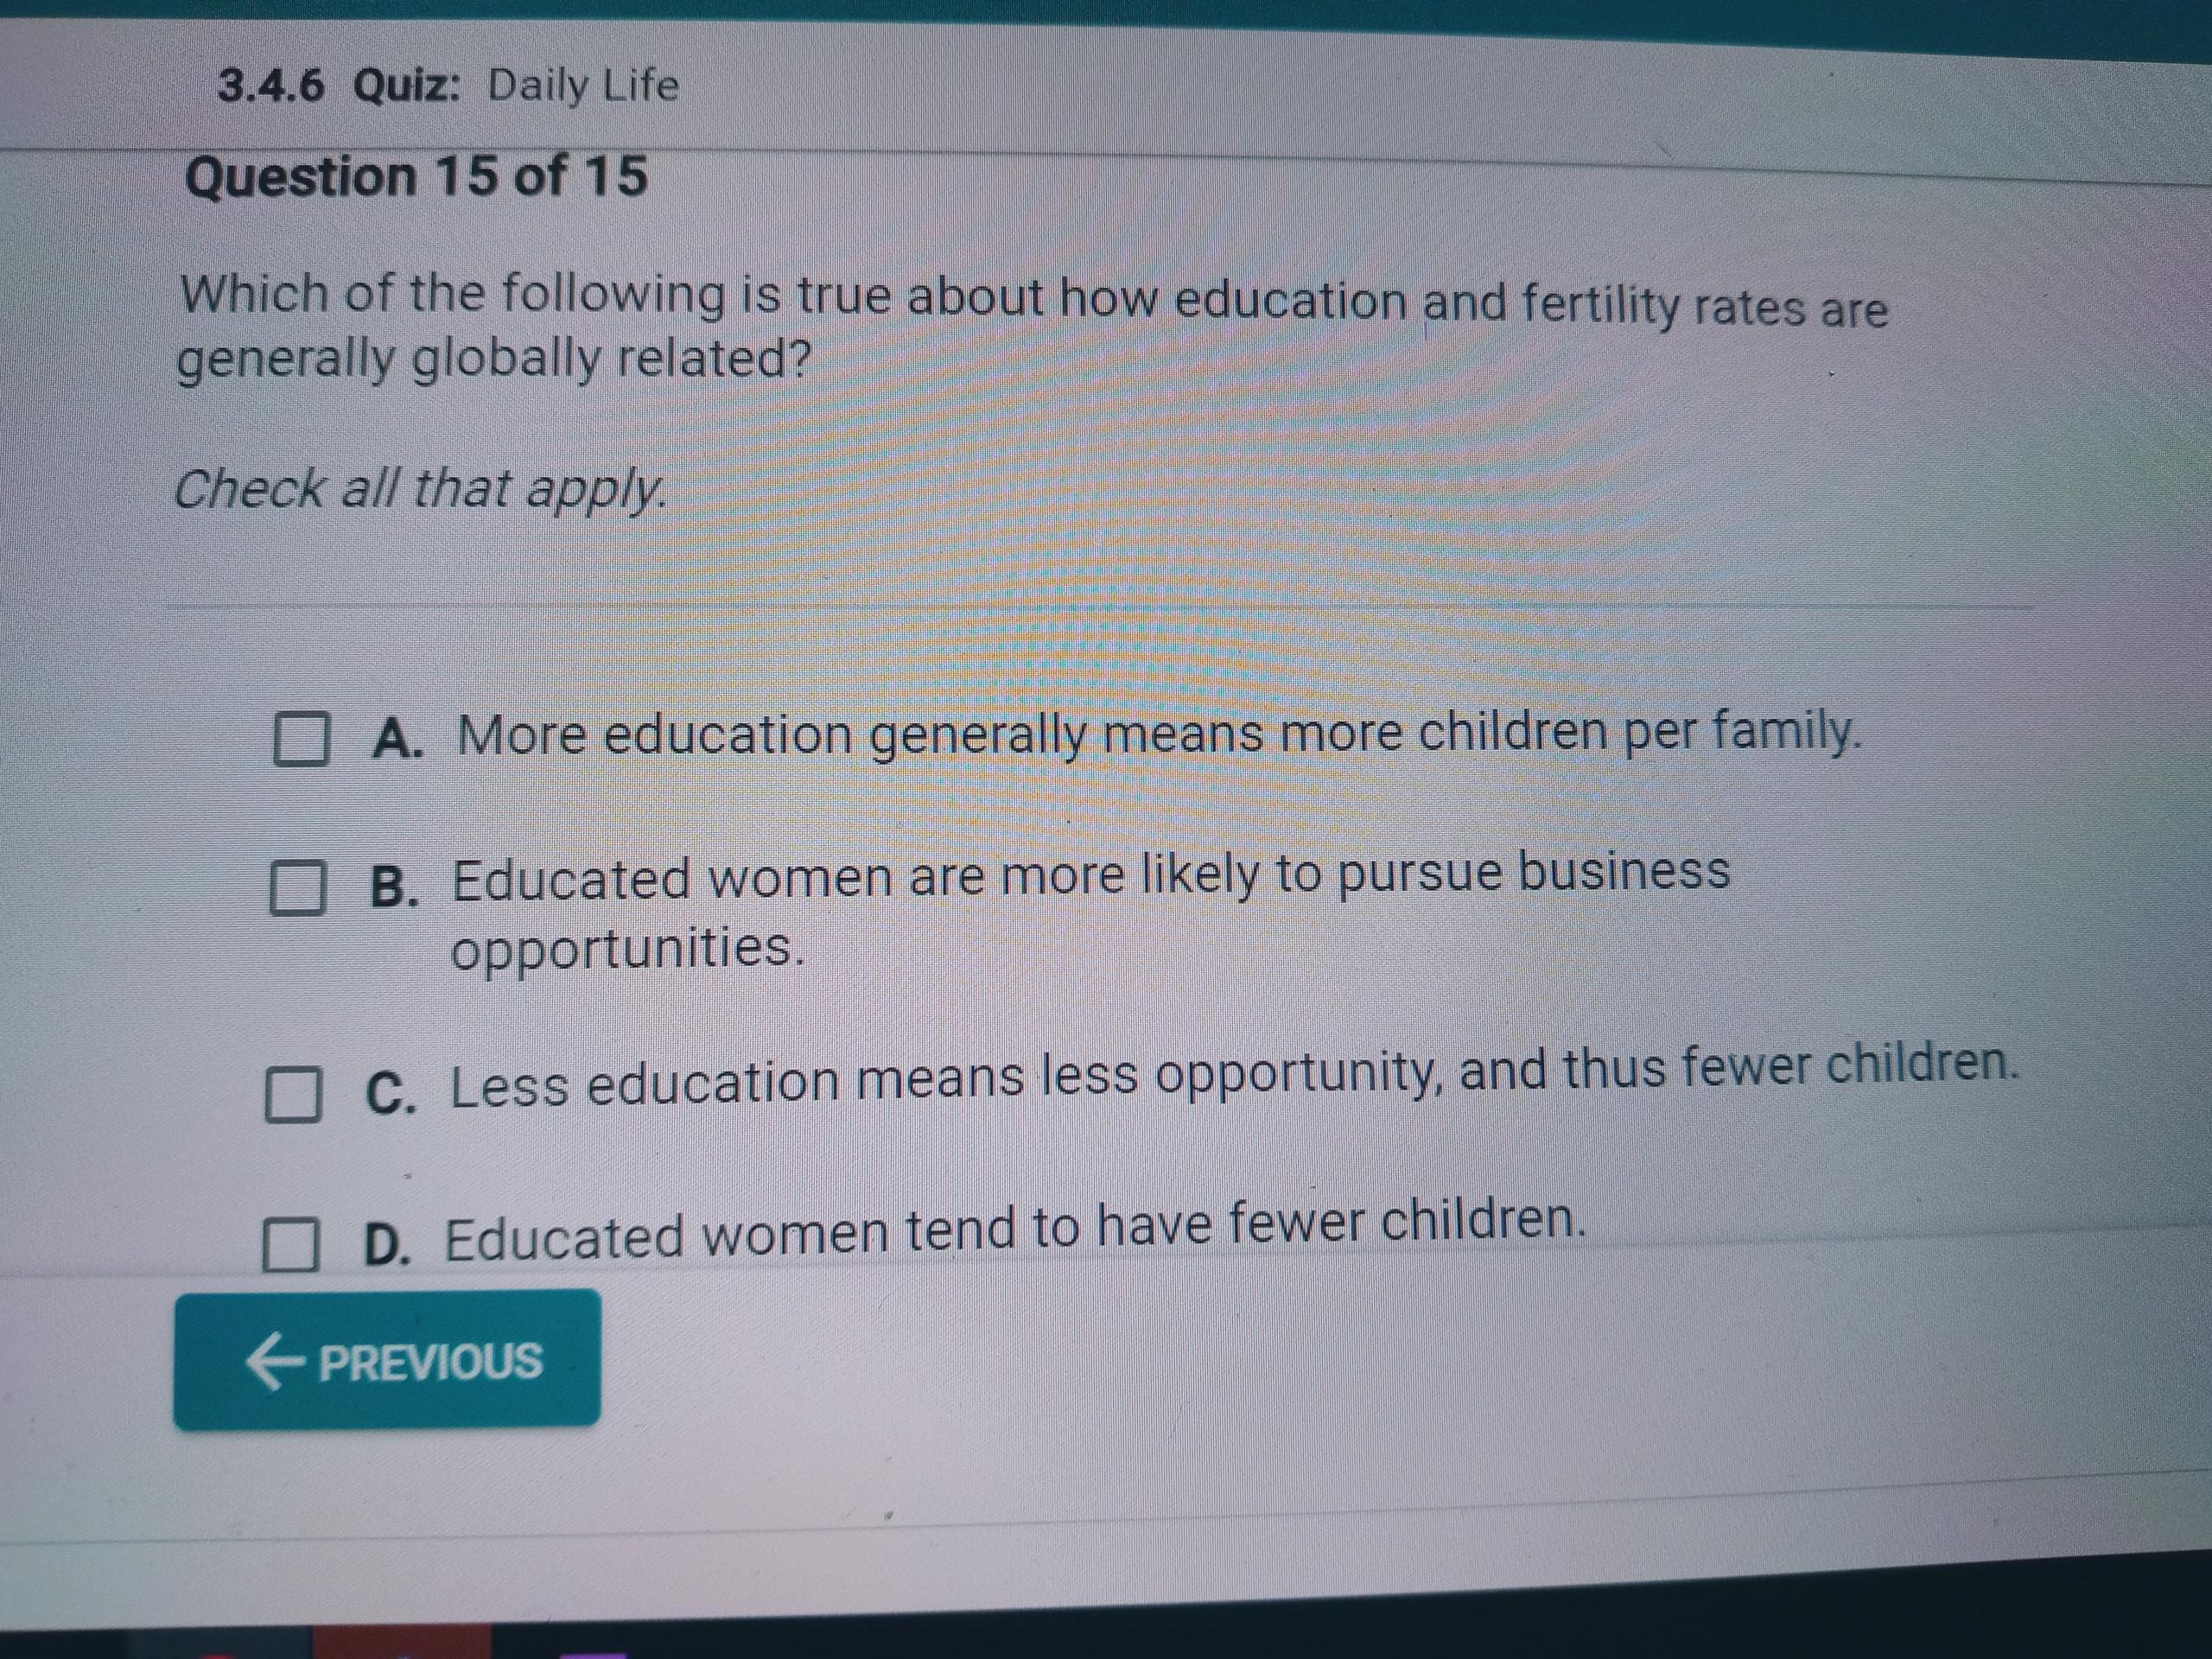 50 POINTS PLEASE HELPPPPPWhich Of The Following Is True About How Education And Fertility Rates Are Generally